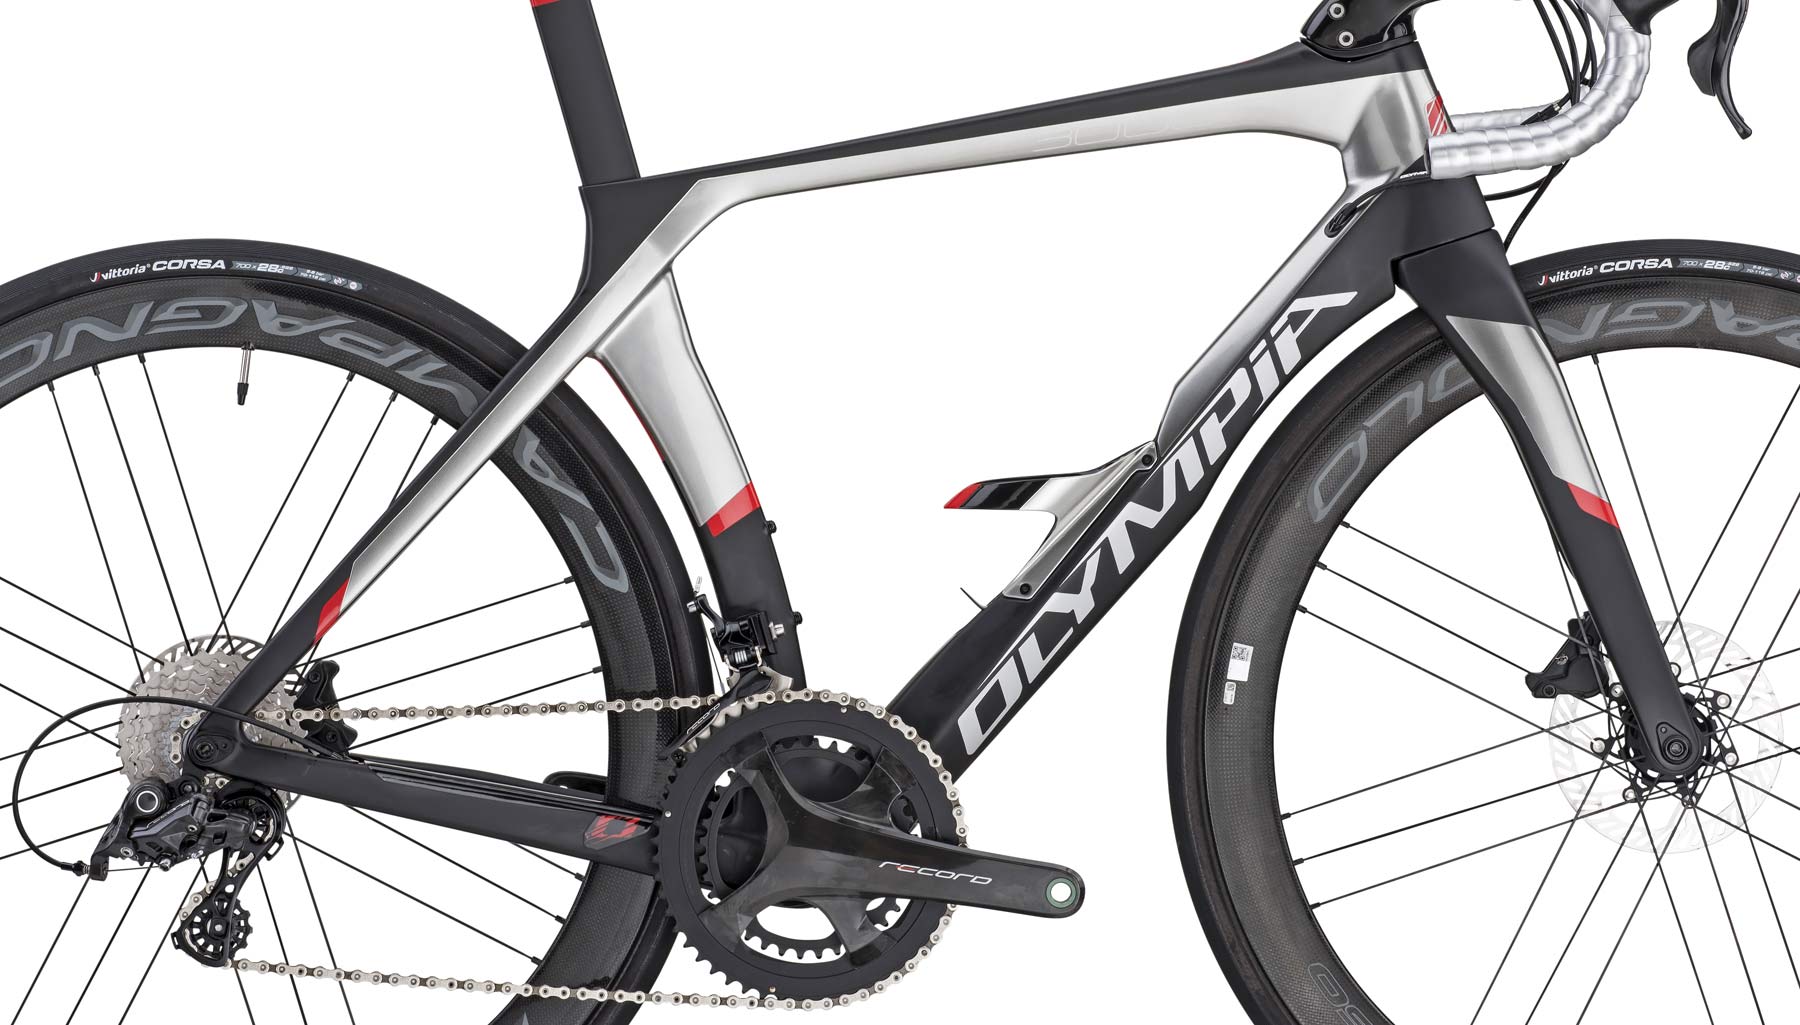 2019 Olympia Boost Disc limited edition carbon disc brake aero road bike